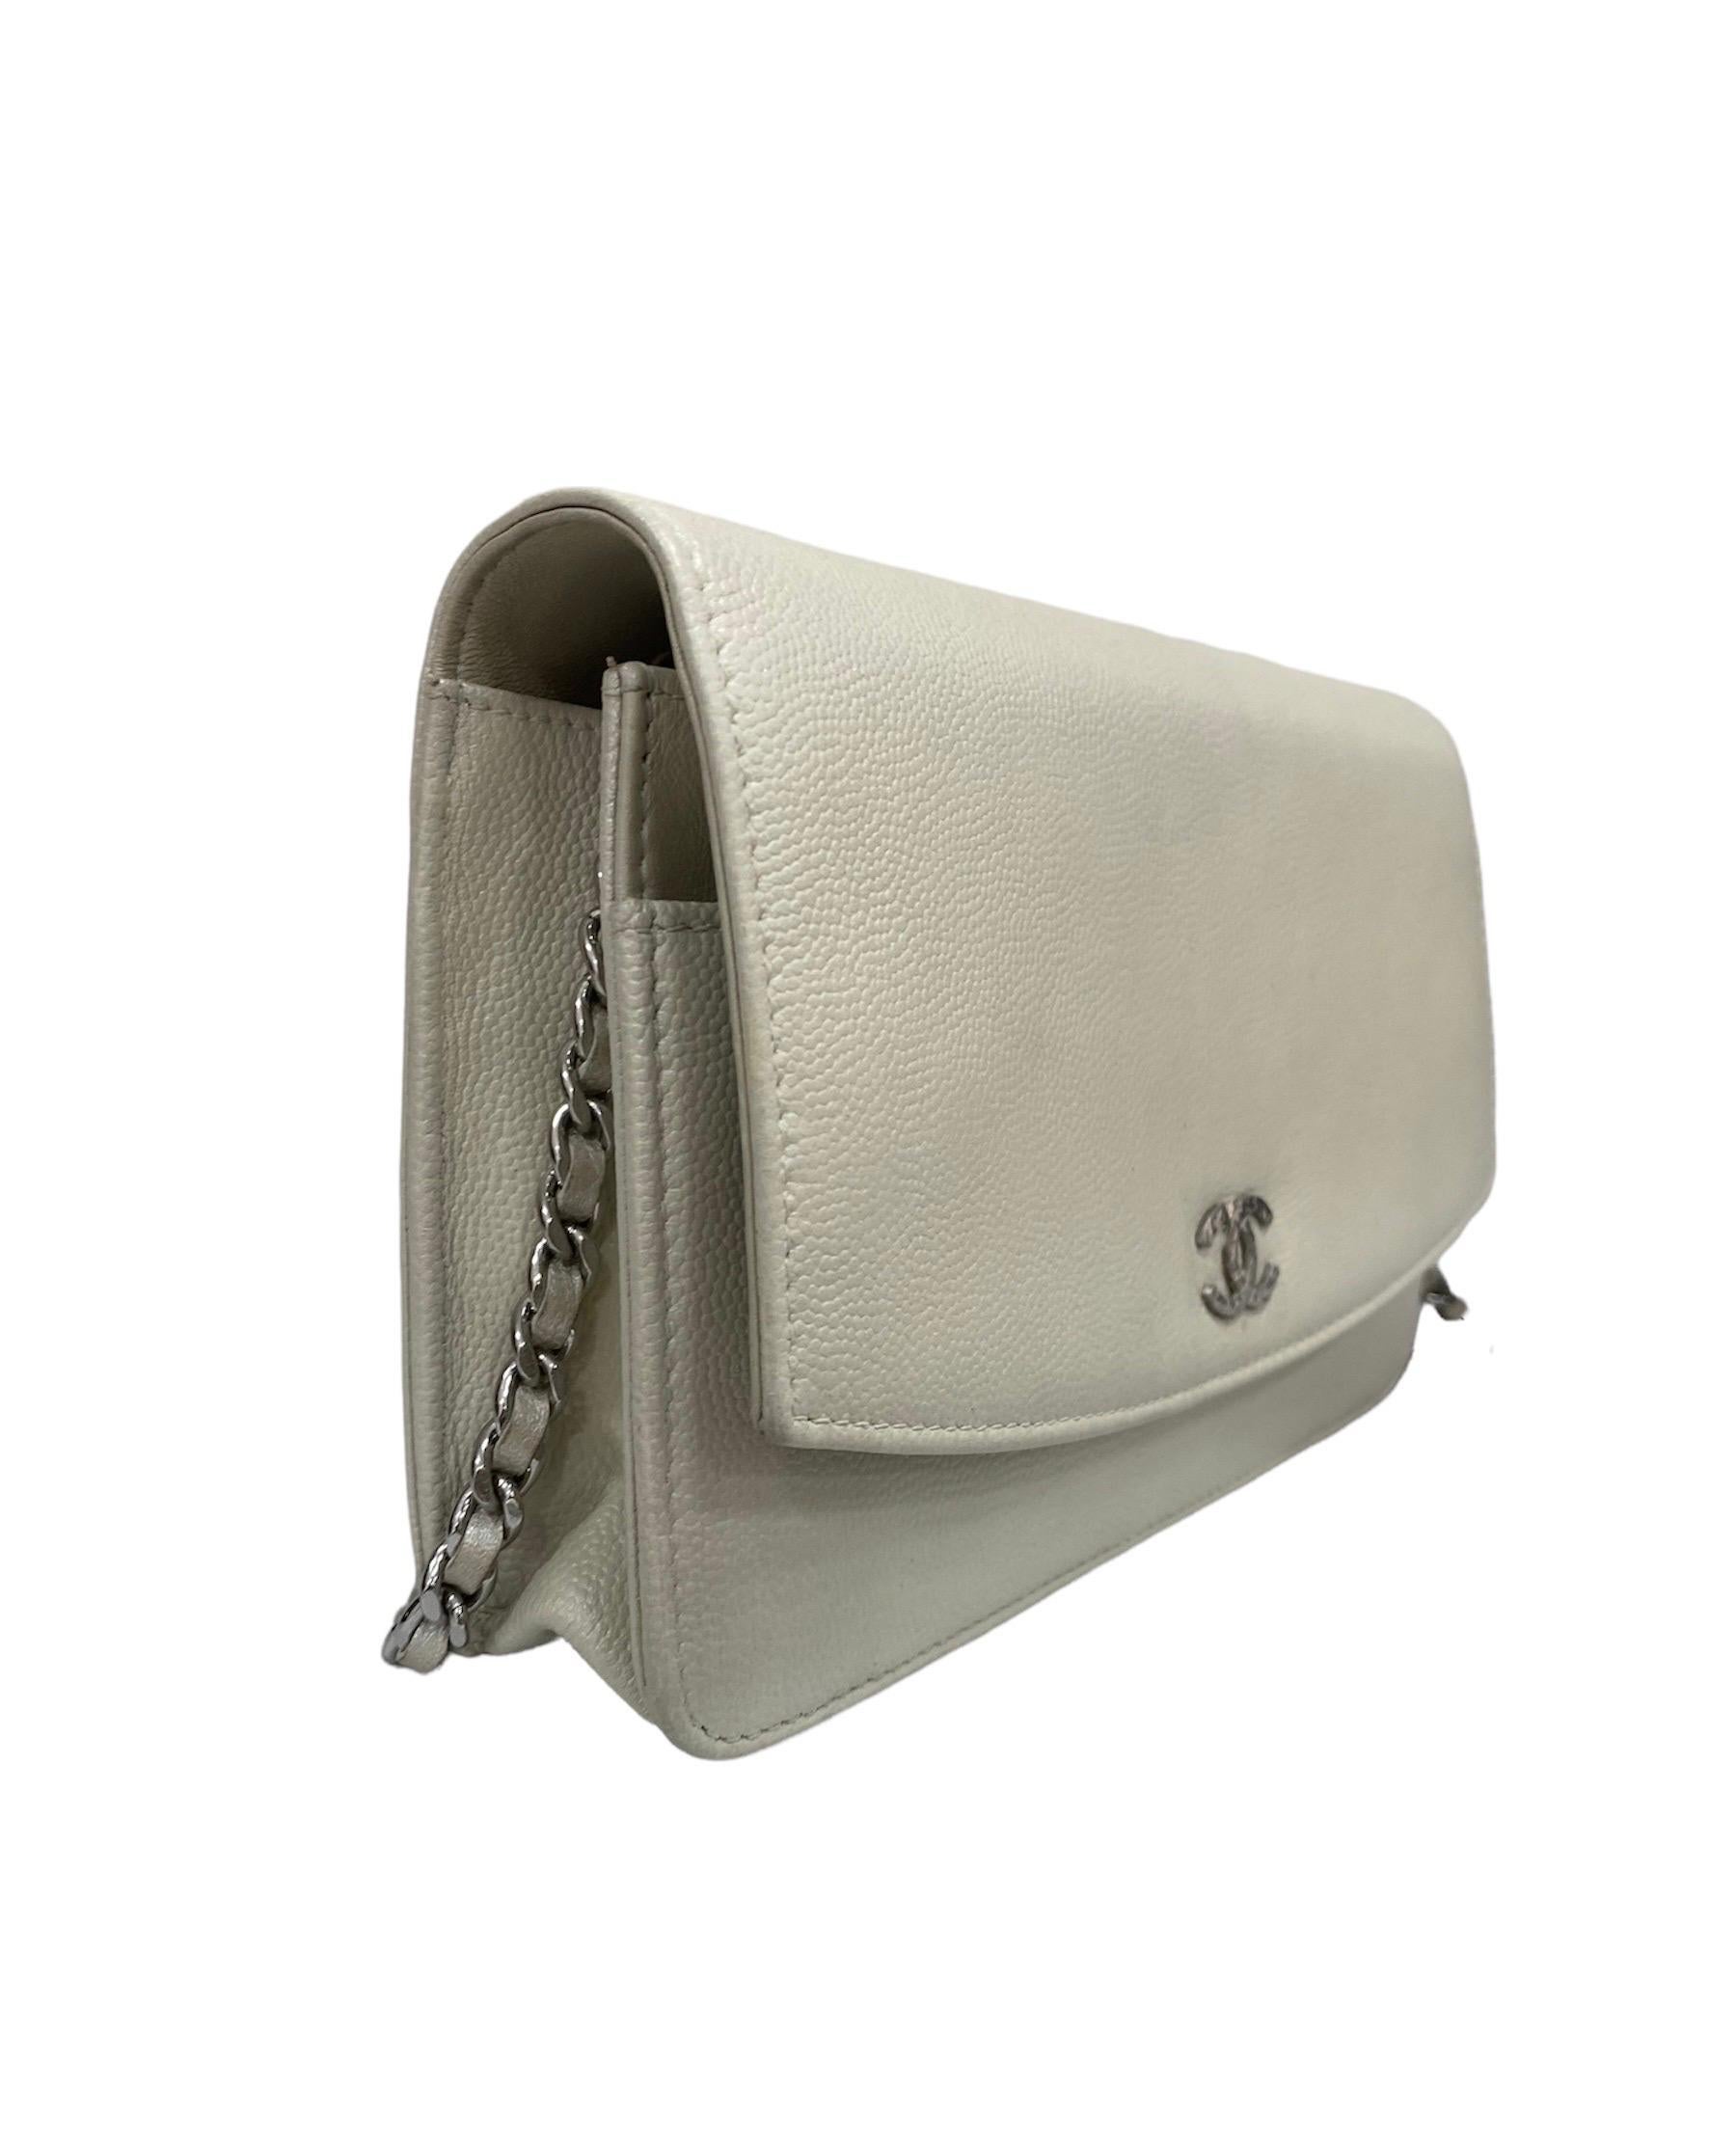 Chanel shoulder bag, Woc model, made of ice-colored hammered leather, with silver hardware.

Equipped with a flap with button closure, internally lined in gray canvas, roomy for the essentials.

Equipped with a leather and chain shoulder strap and